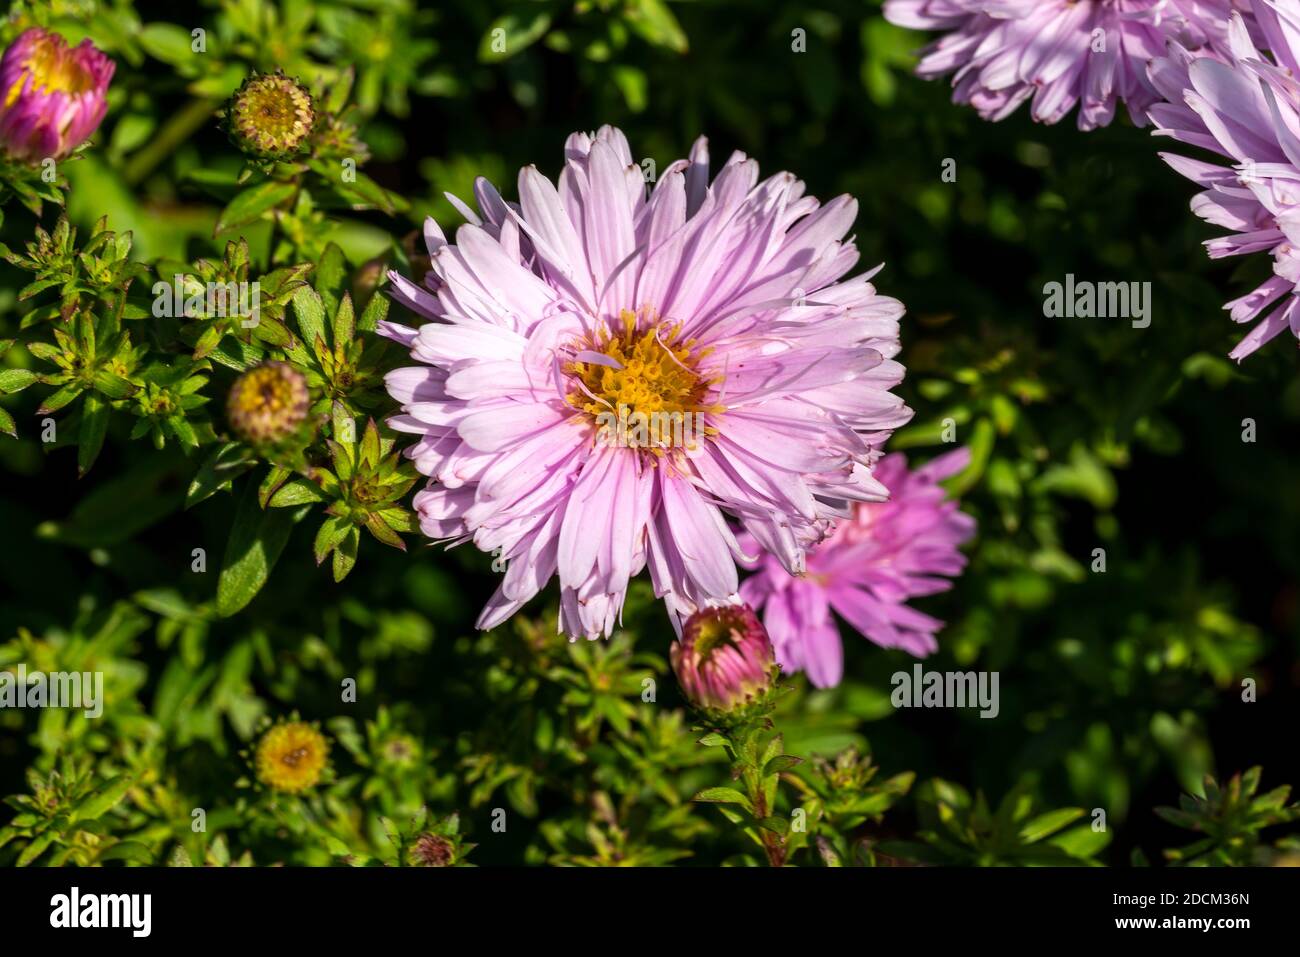 Aster Autumn Jewels 'Rose Quartz' a pink herbaceous perennial summer autumn flower plant commonly known as Michaelmas daisy, stock photo image Stock Photo